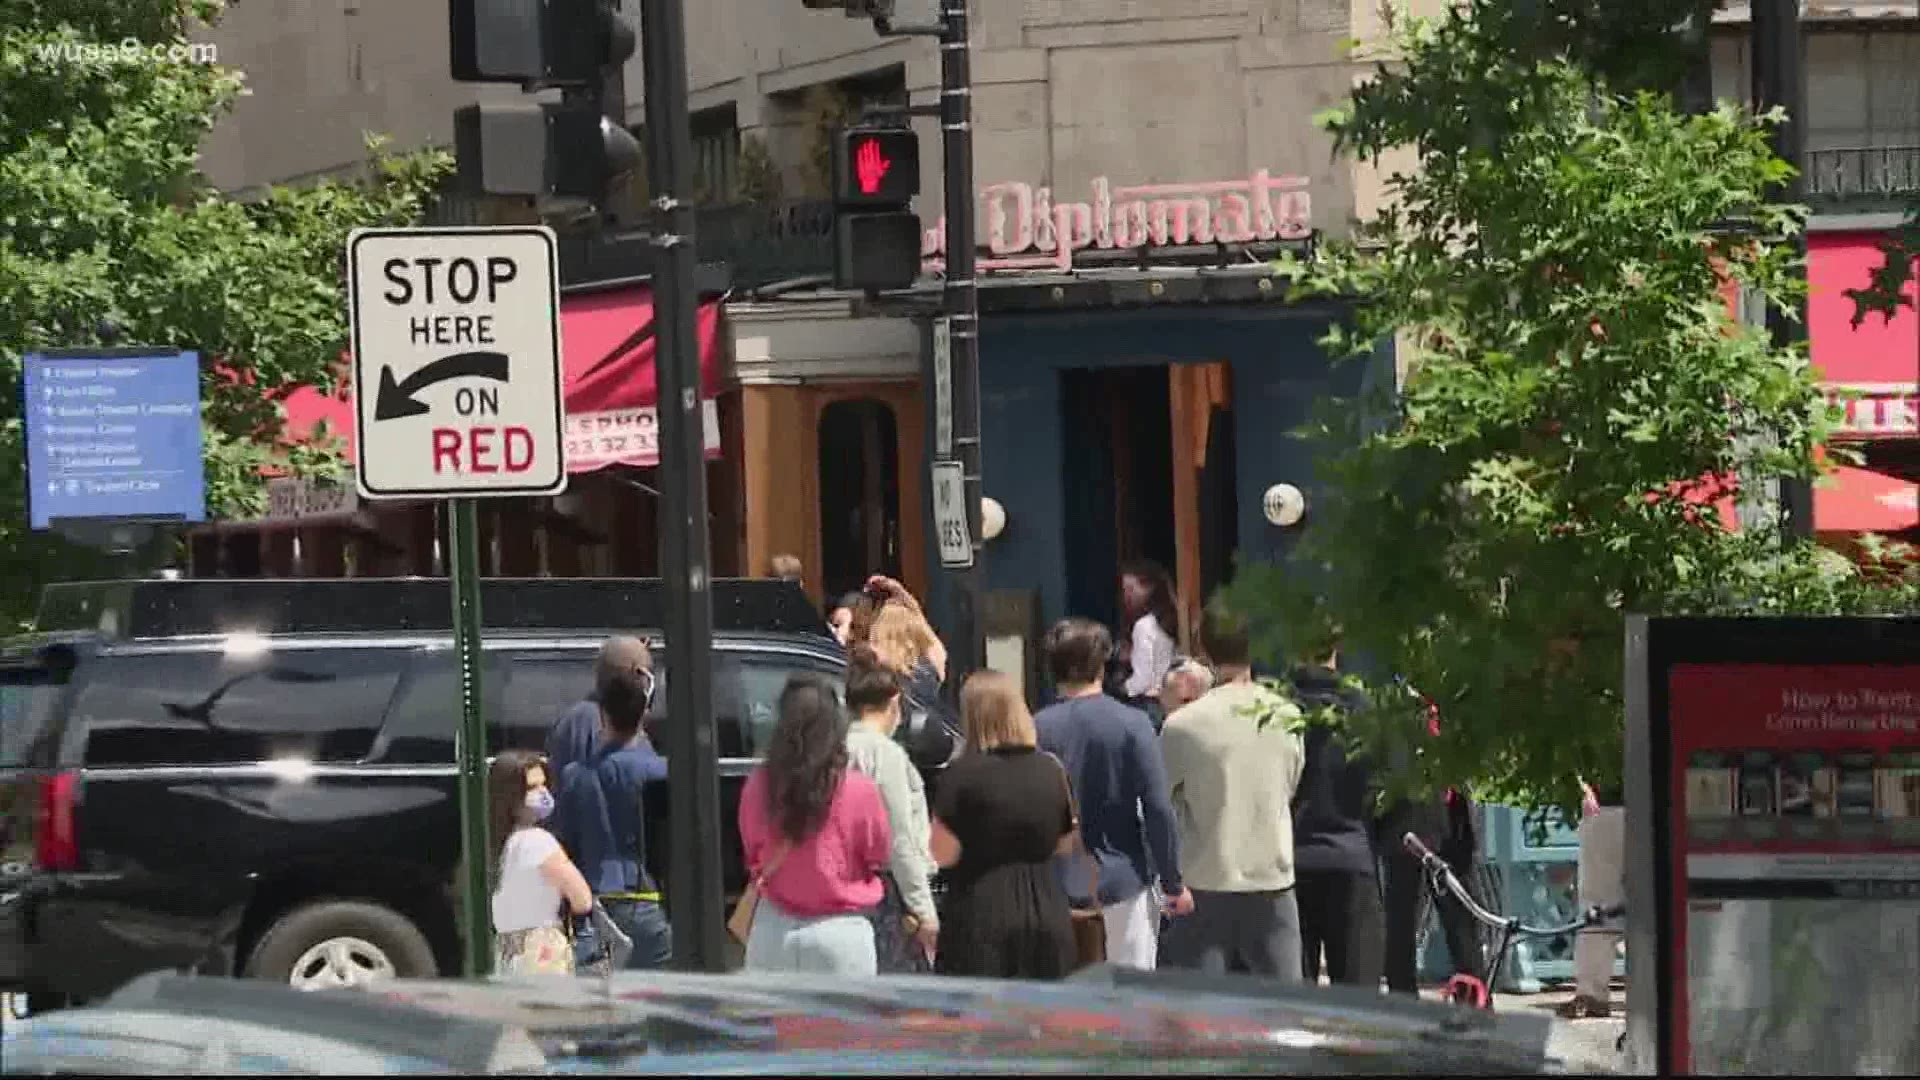 An unscheduled pit stop at D.C.'s Le Diplomate got people talking on social media.